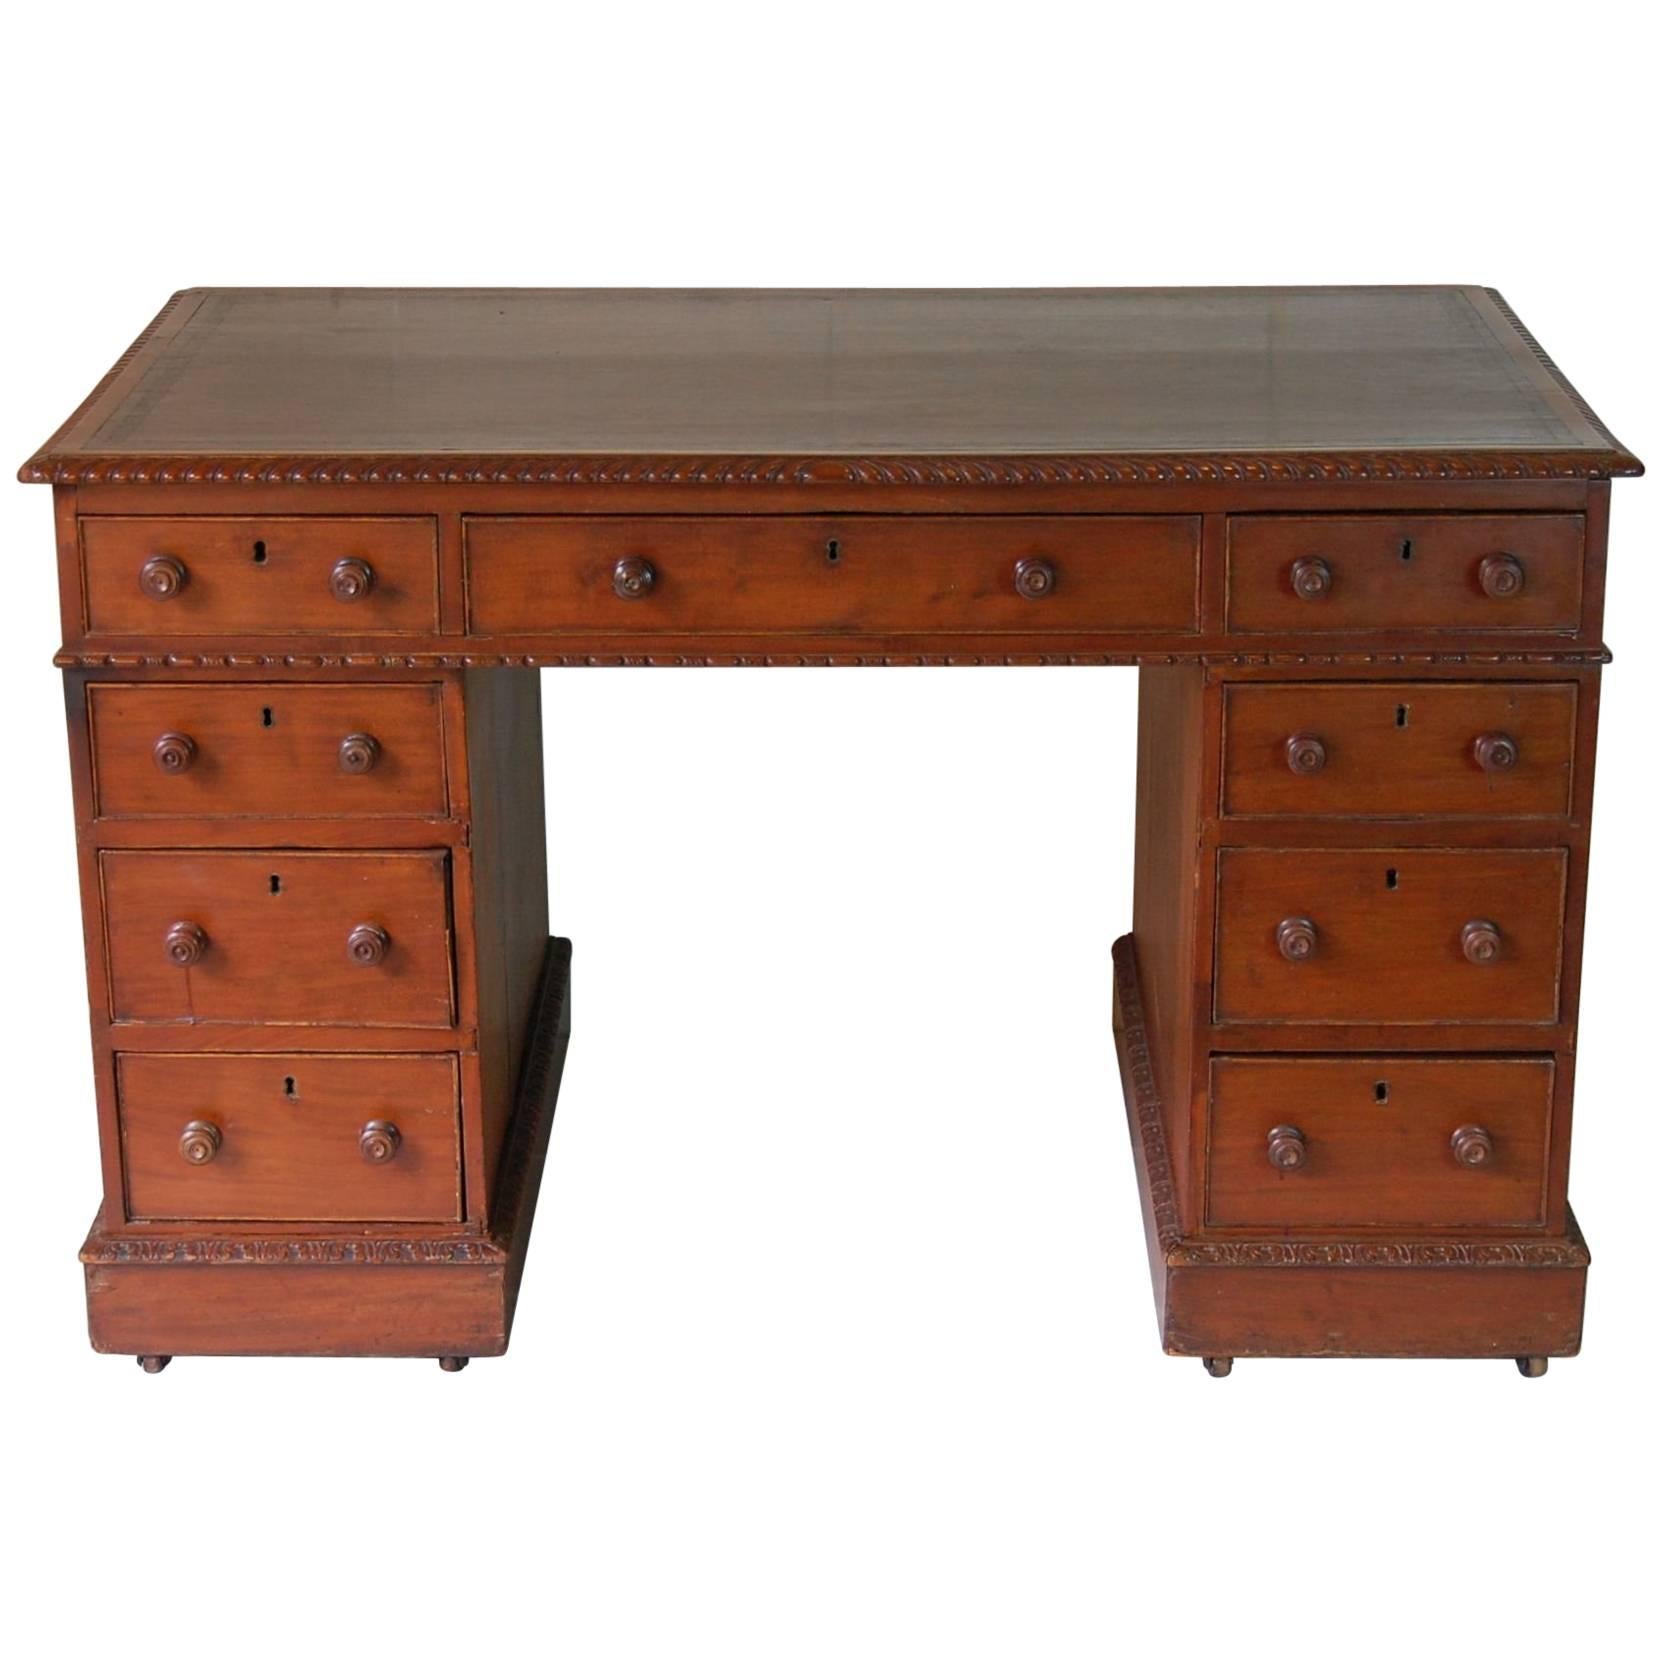 Georgian Style Mahogany Partners Desk with Leather Top, circa 1900